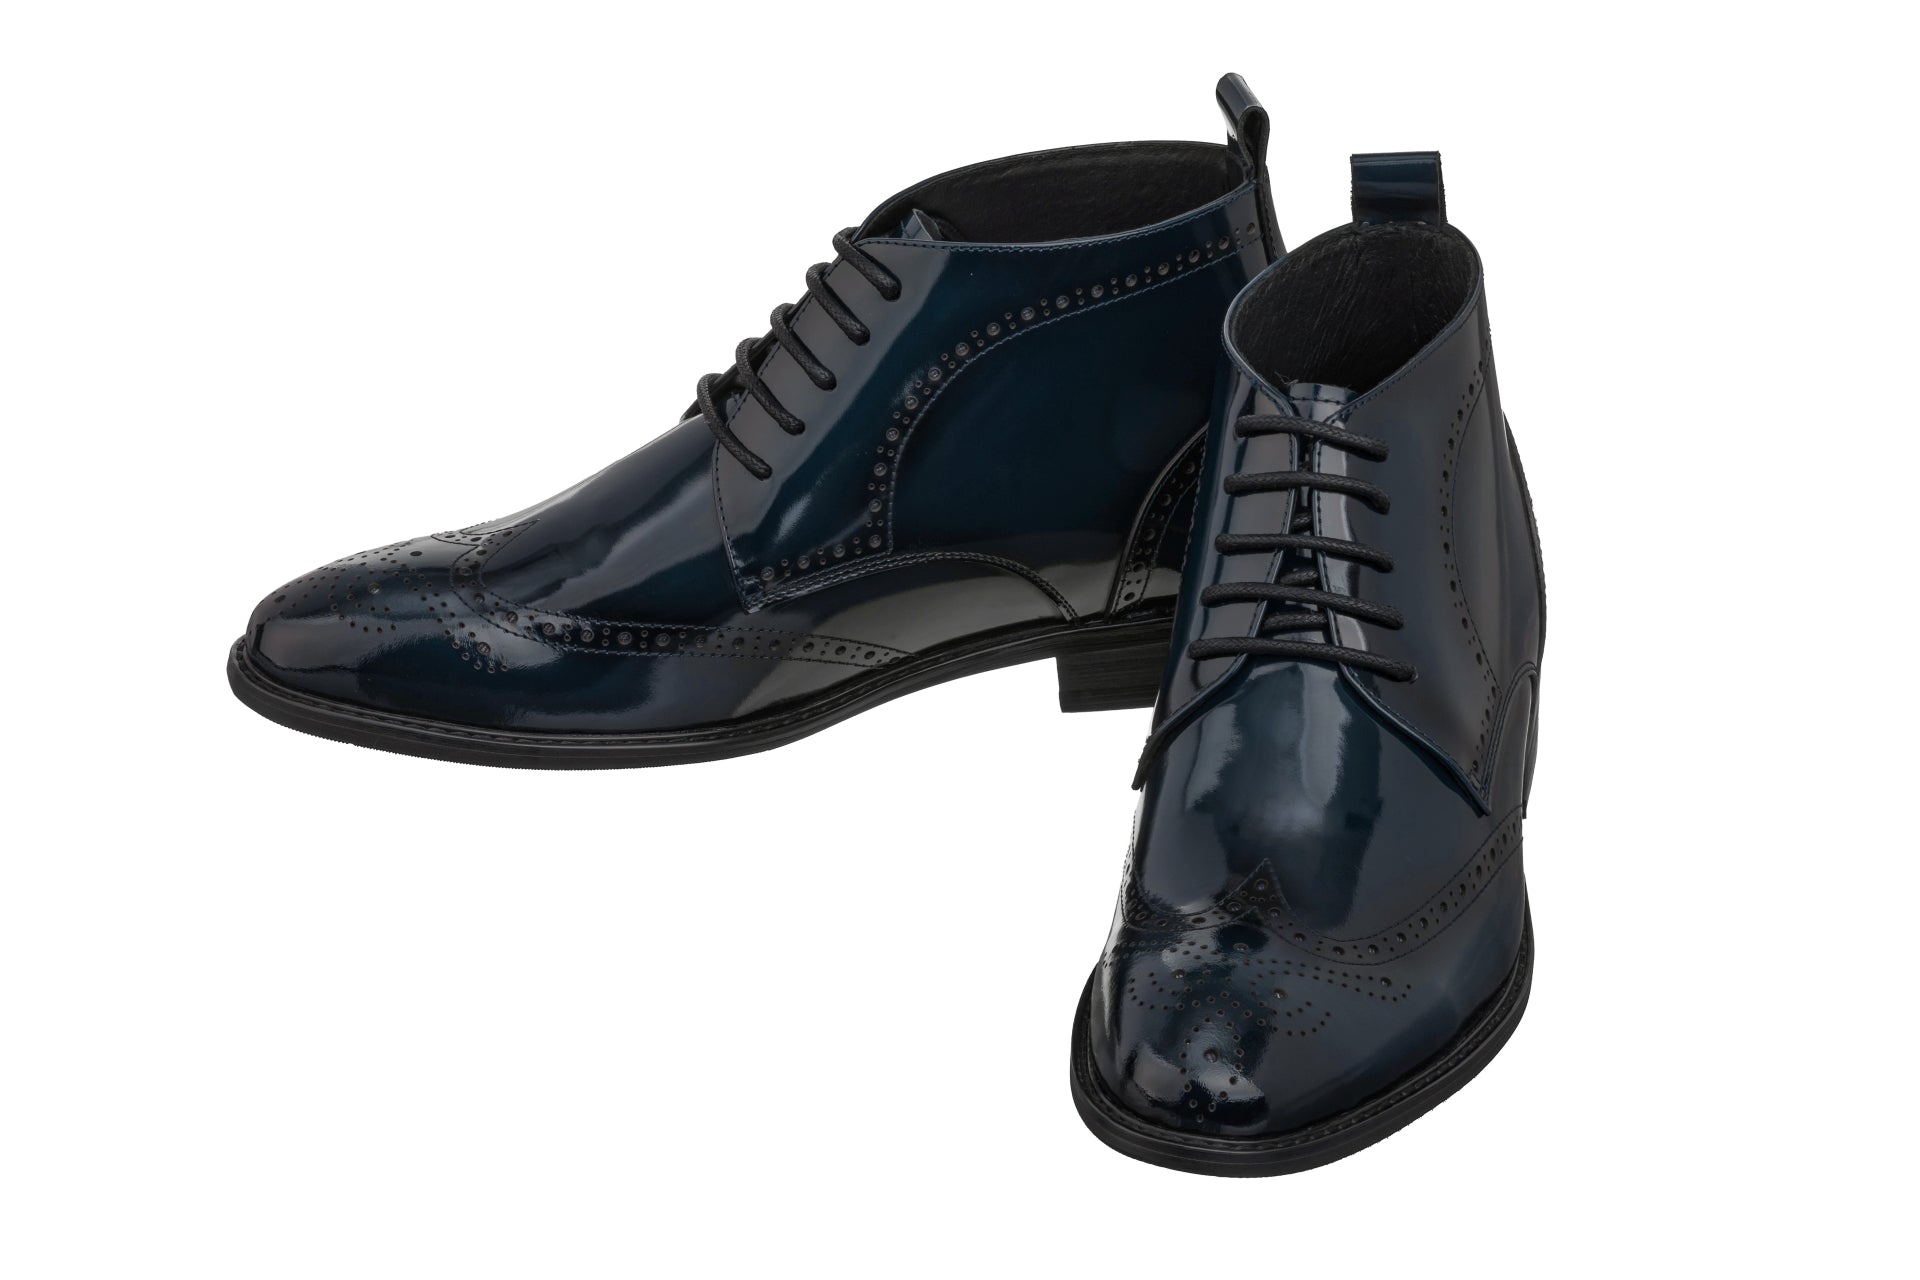 Elevator shoes height increase TOTO - K99603 - 2.8 Inches Taller (Dark Blue)